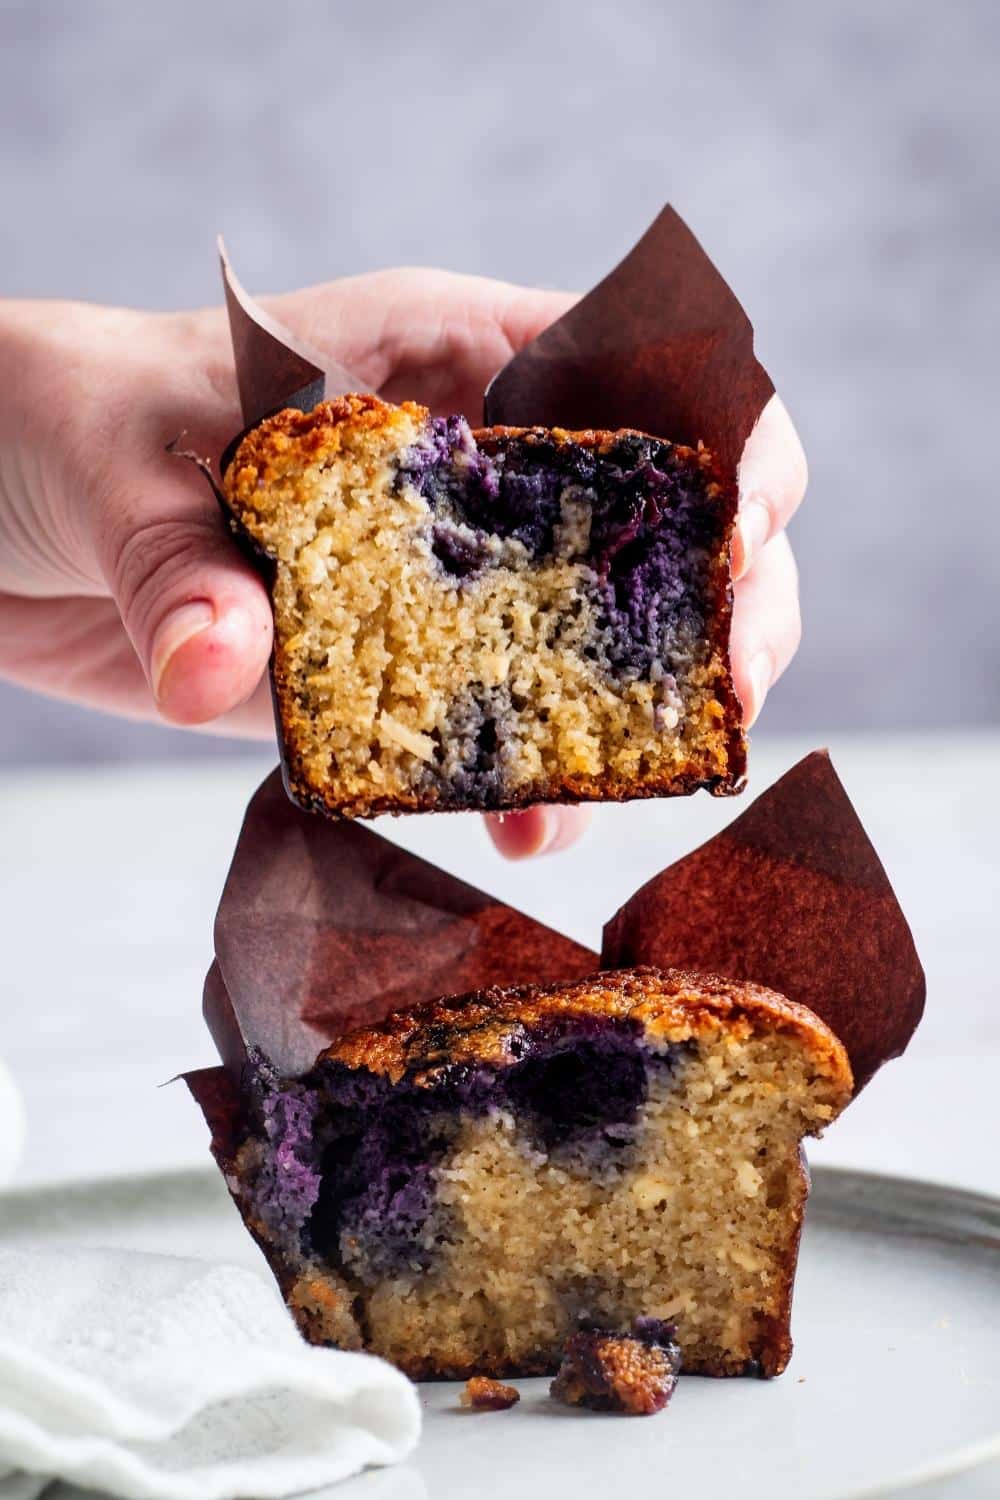 A hand holding half of a blueberry muffin over another half of the muffin.